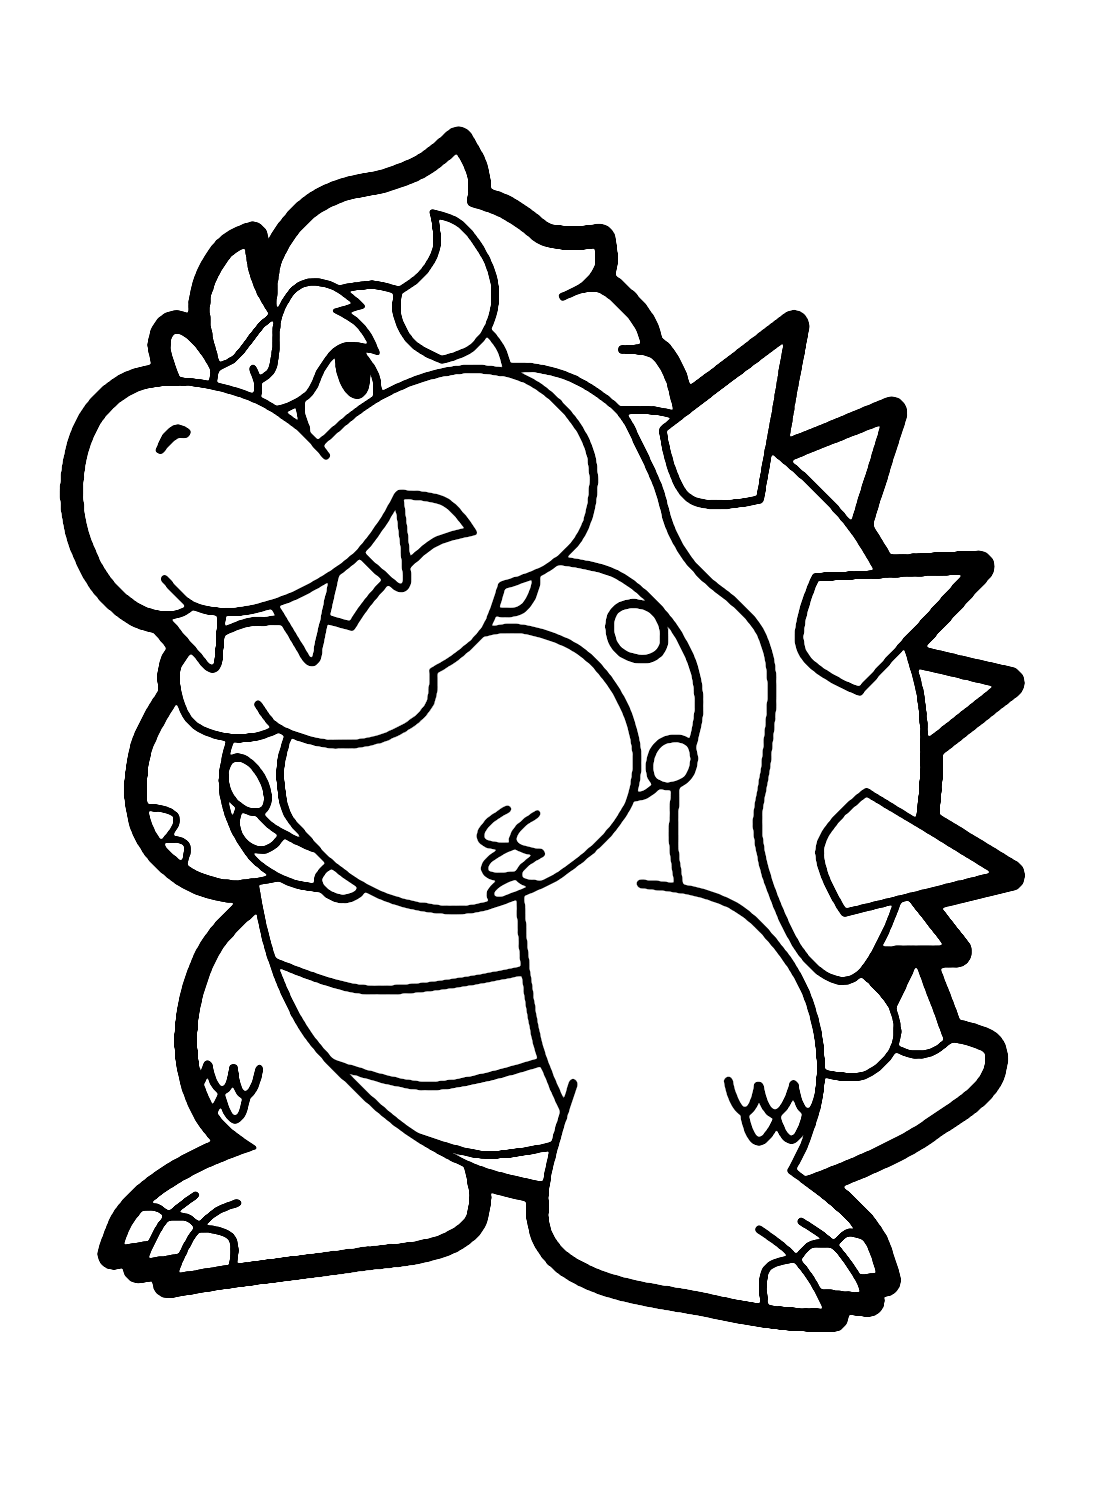 Bowser from Super Mario Coloring Page